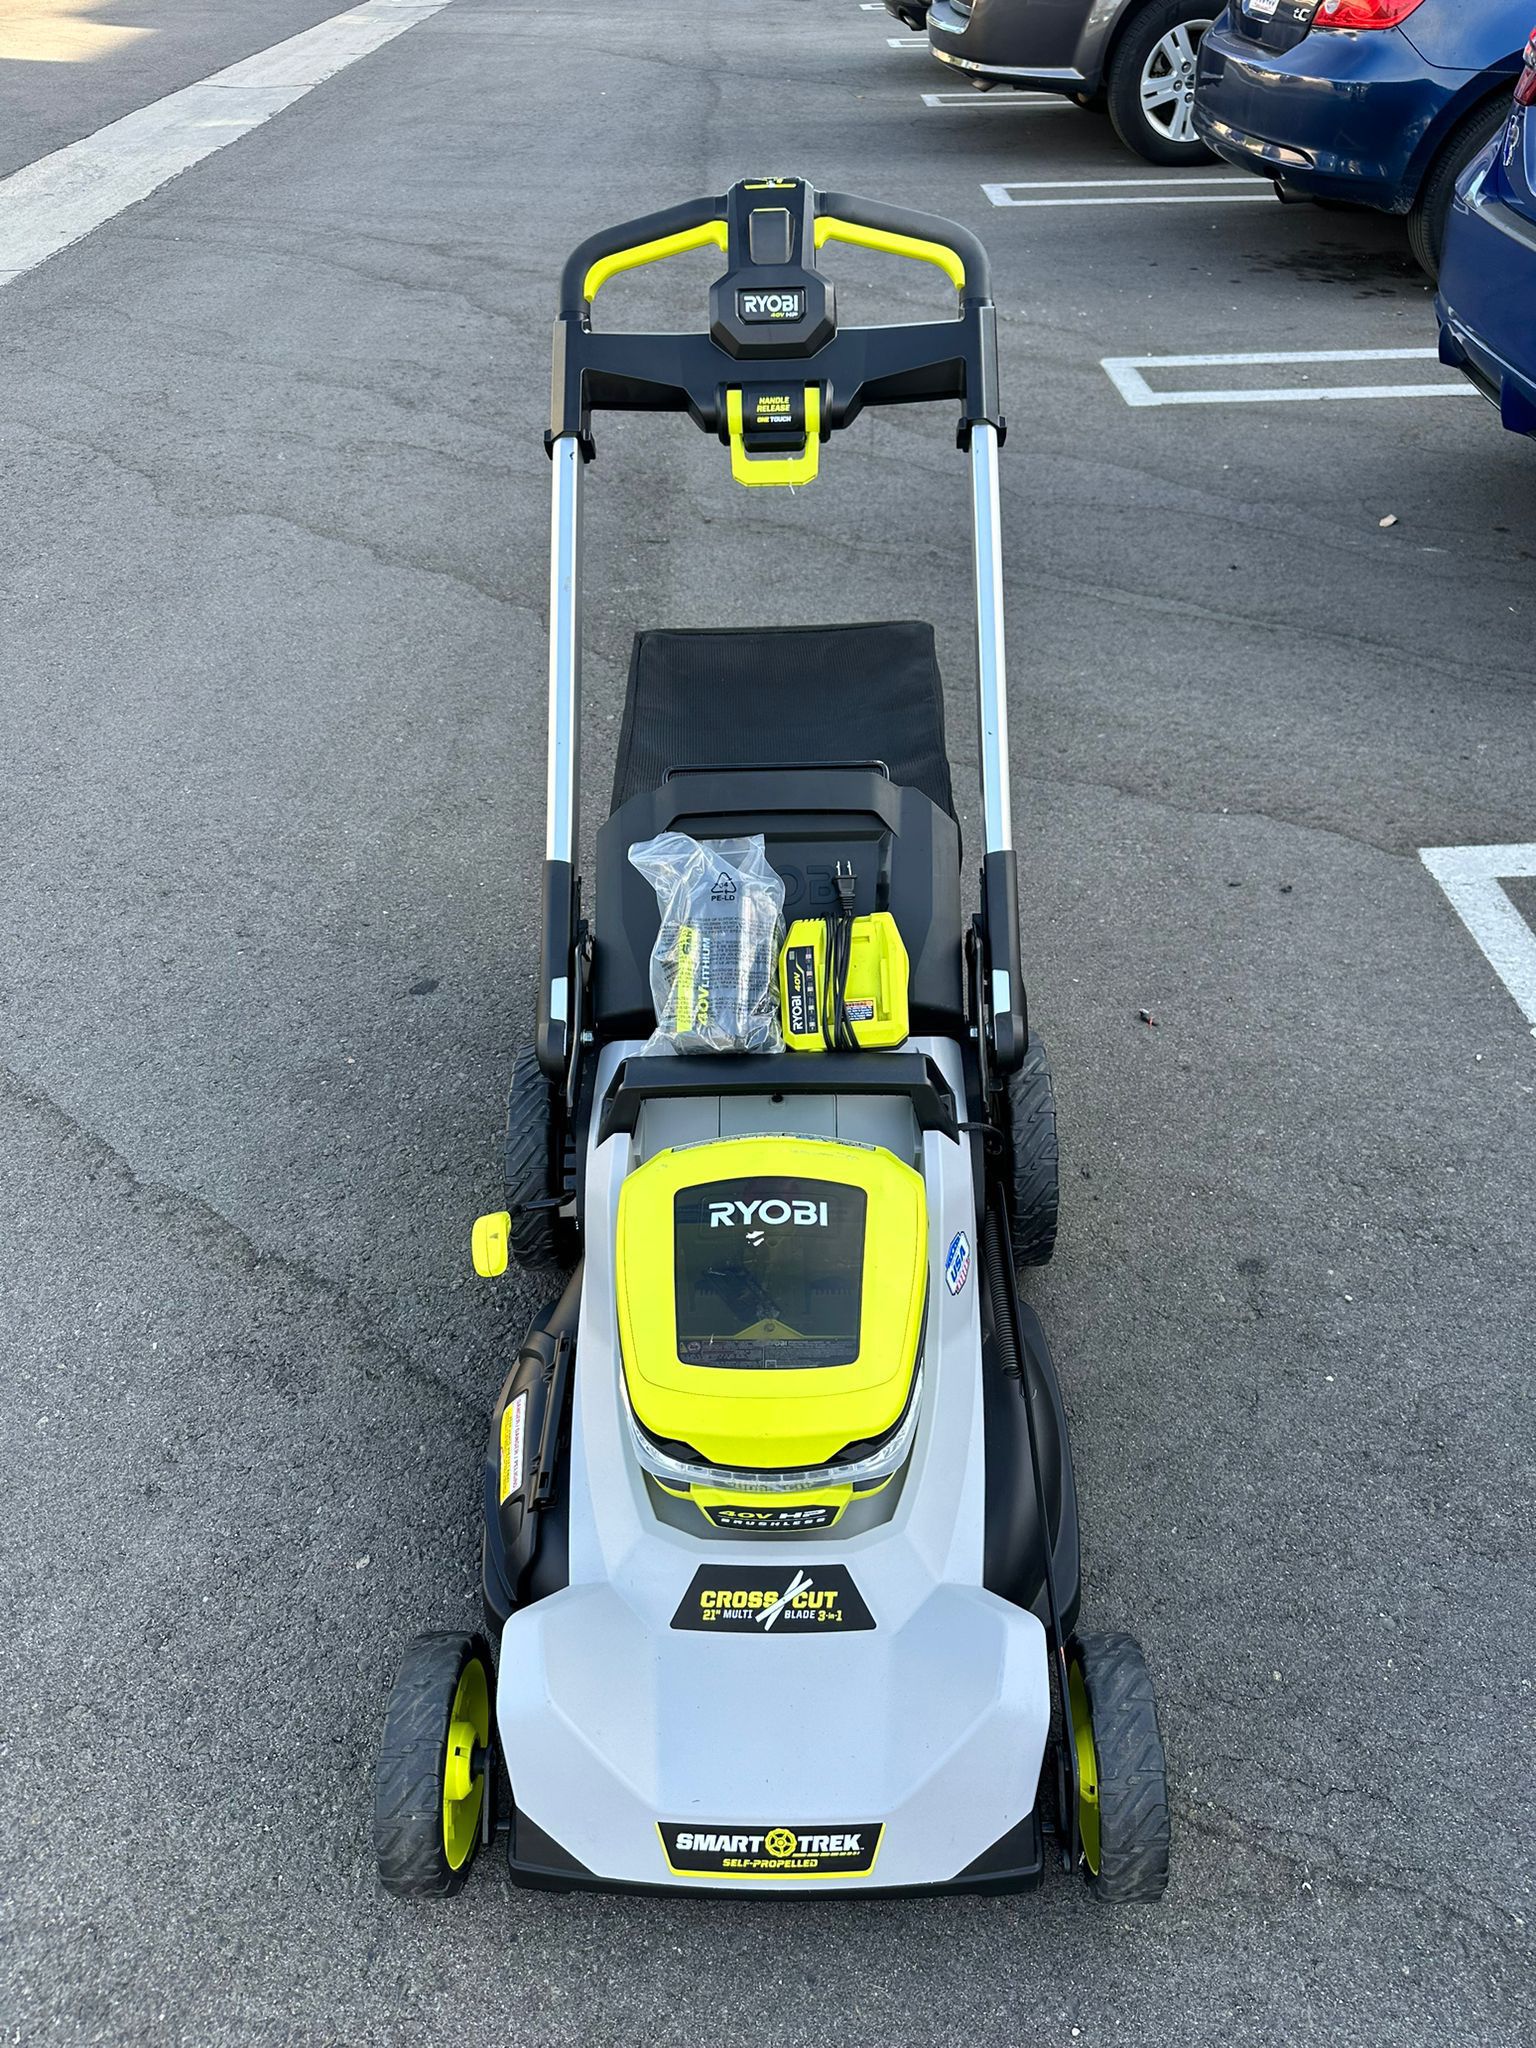 Ryobi Lawn Mower Self Propelled Croos cut . Come w. 1fast charger and 1 6ah Battery (New)